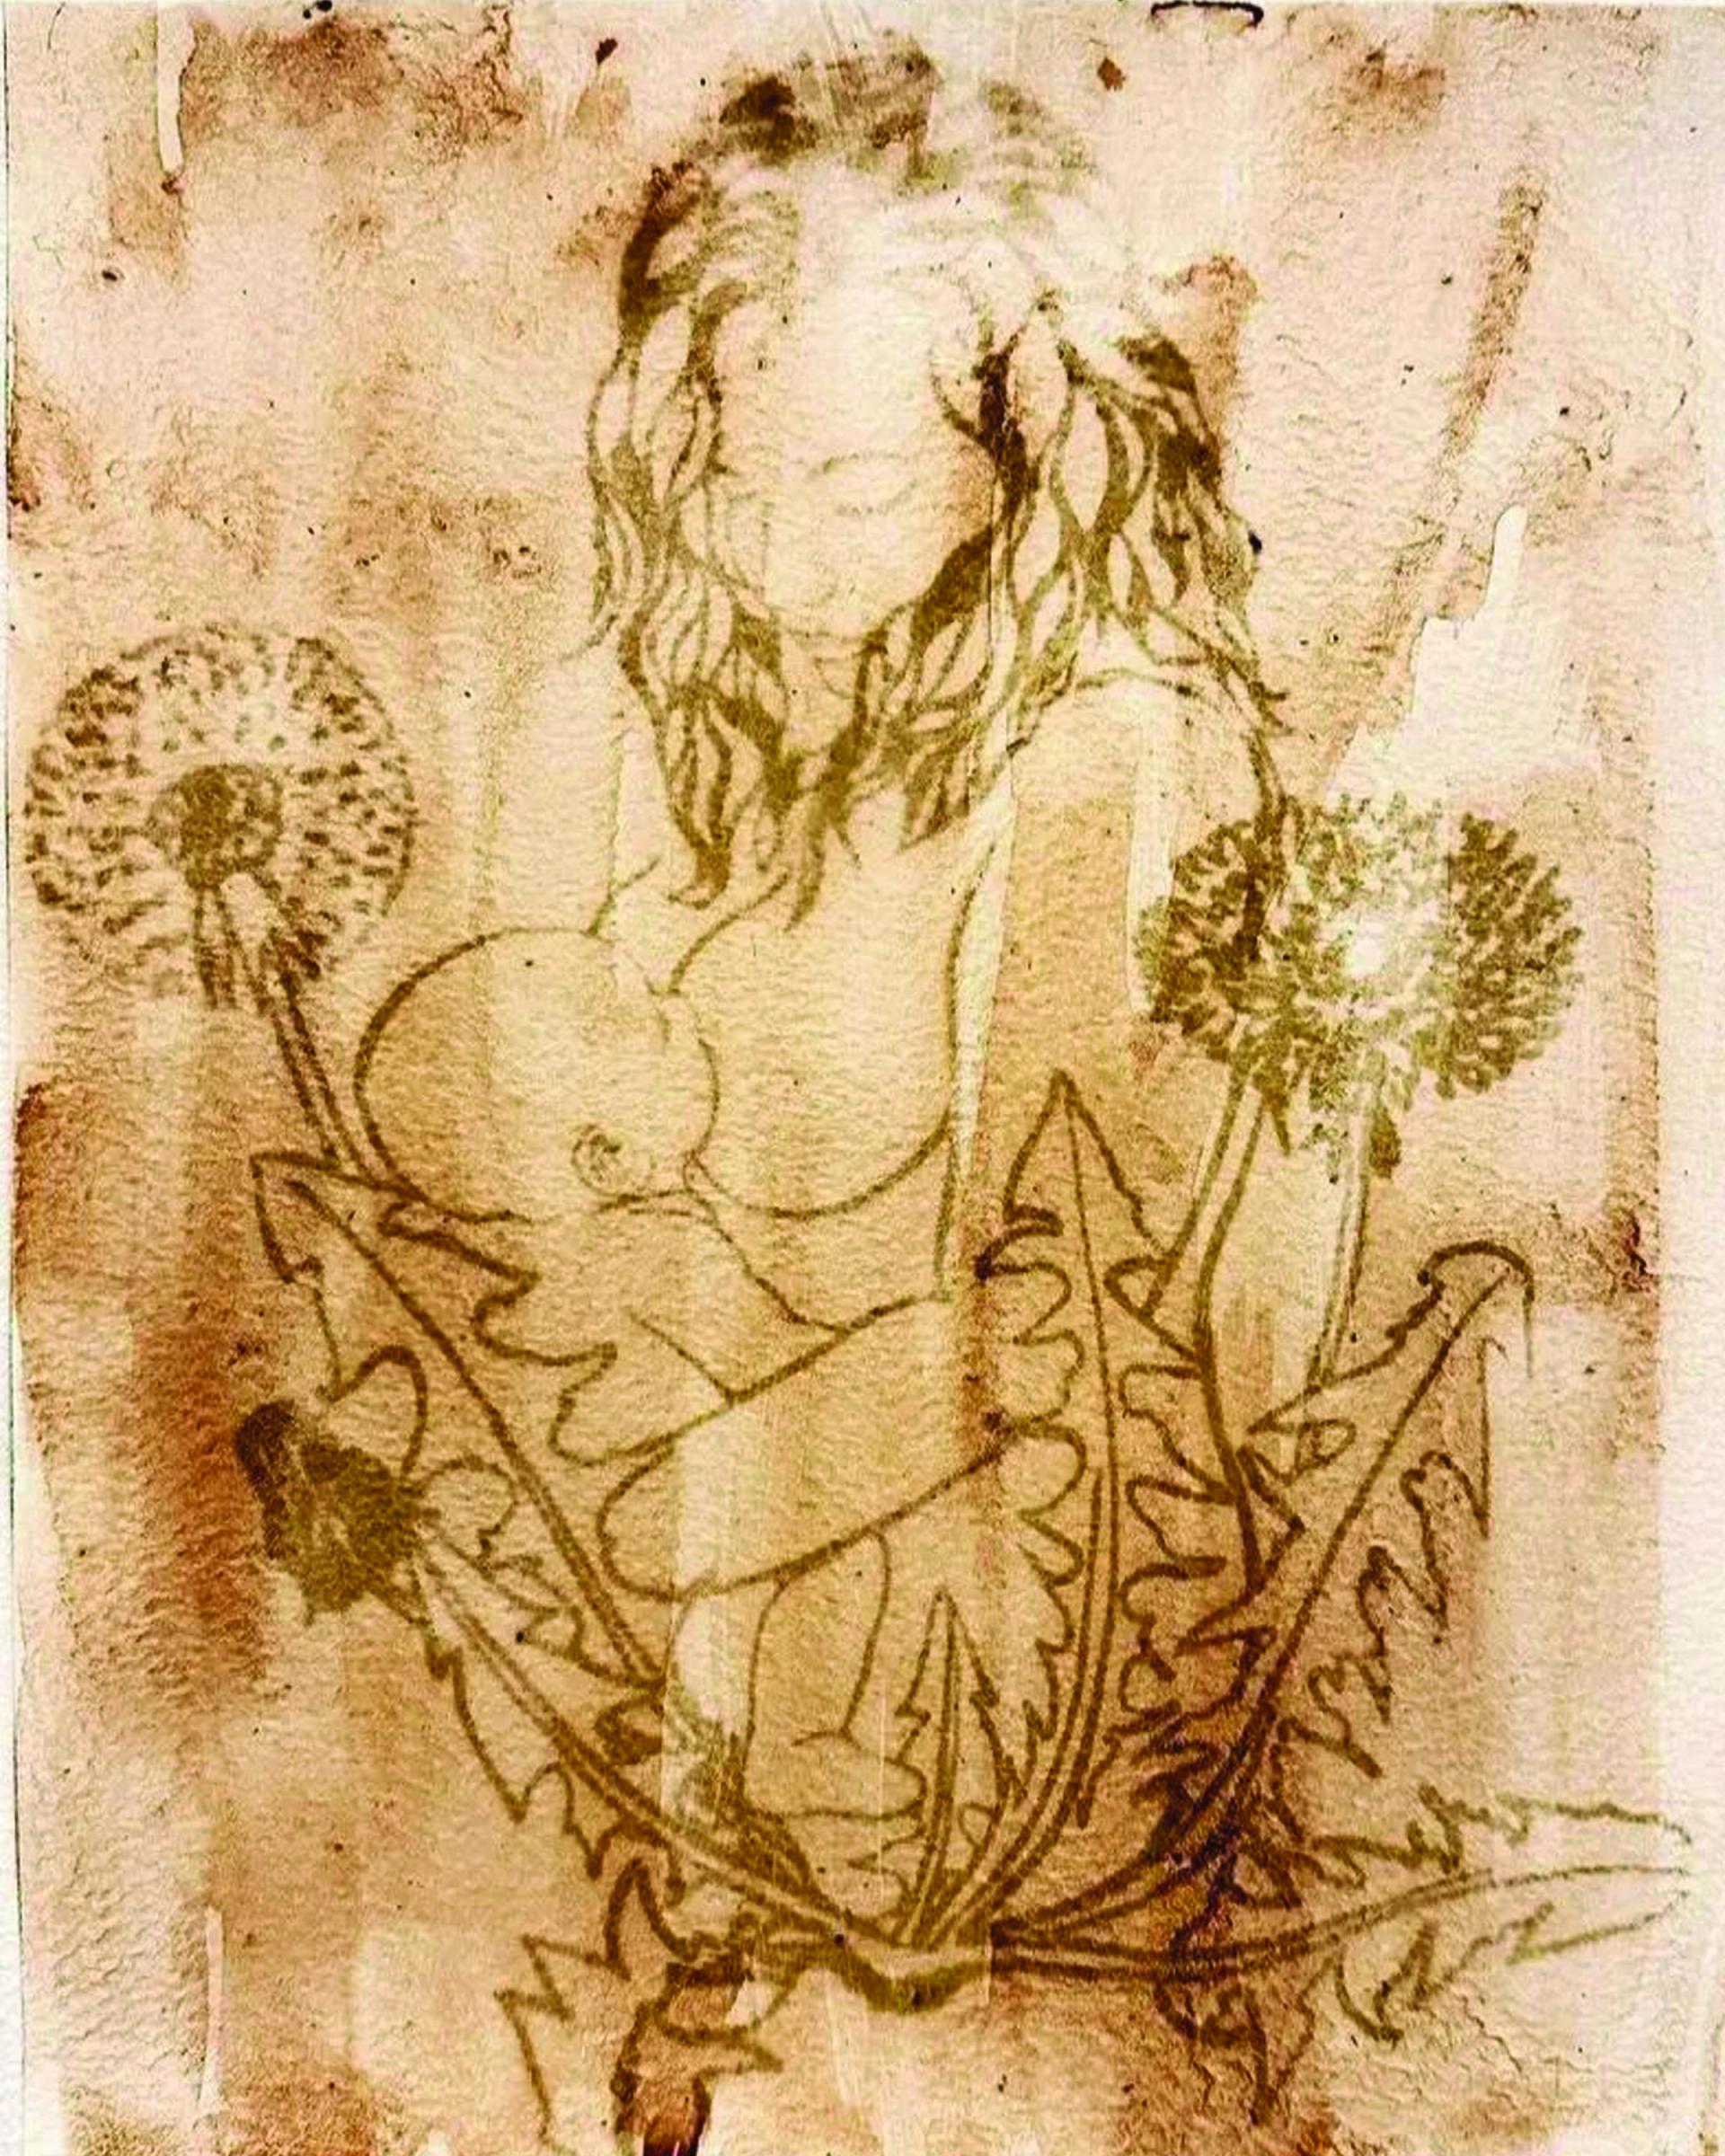 The print is shades of brown with darker lines, creating the image of a mother breastfeeding her
child in the embrace of a dandelion.